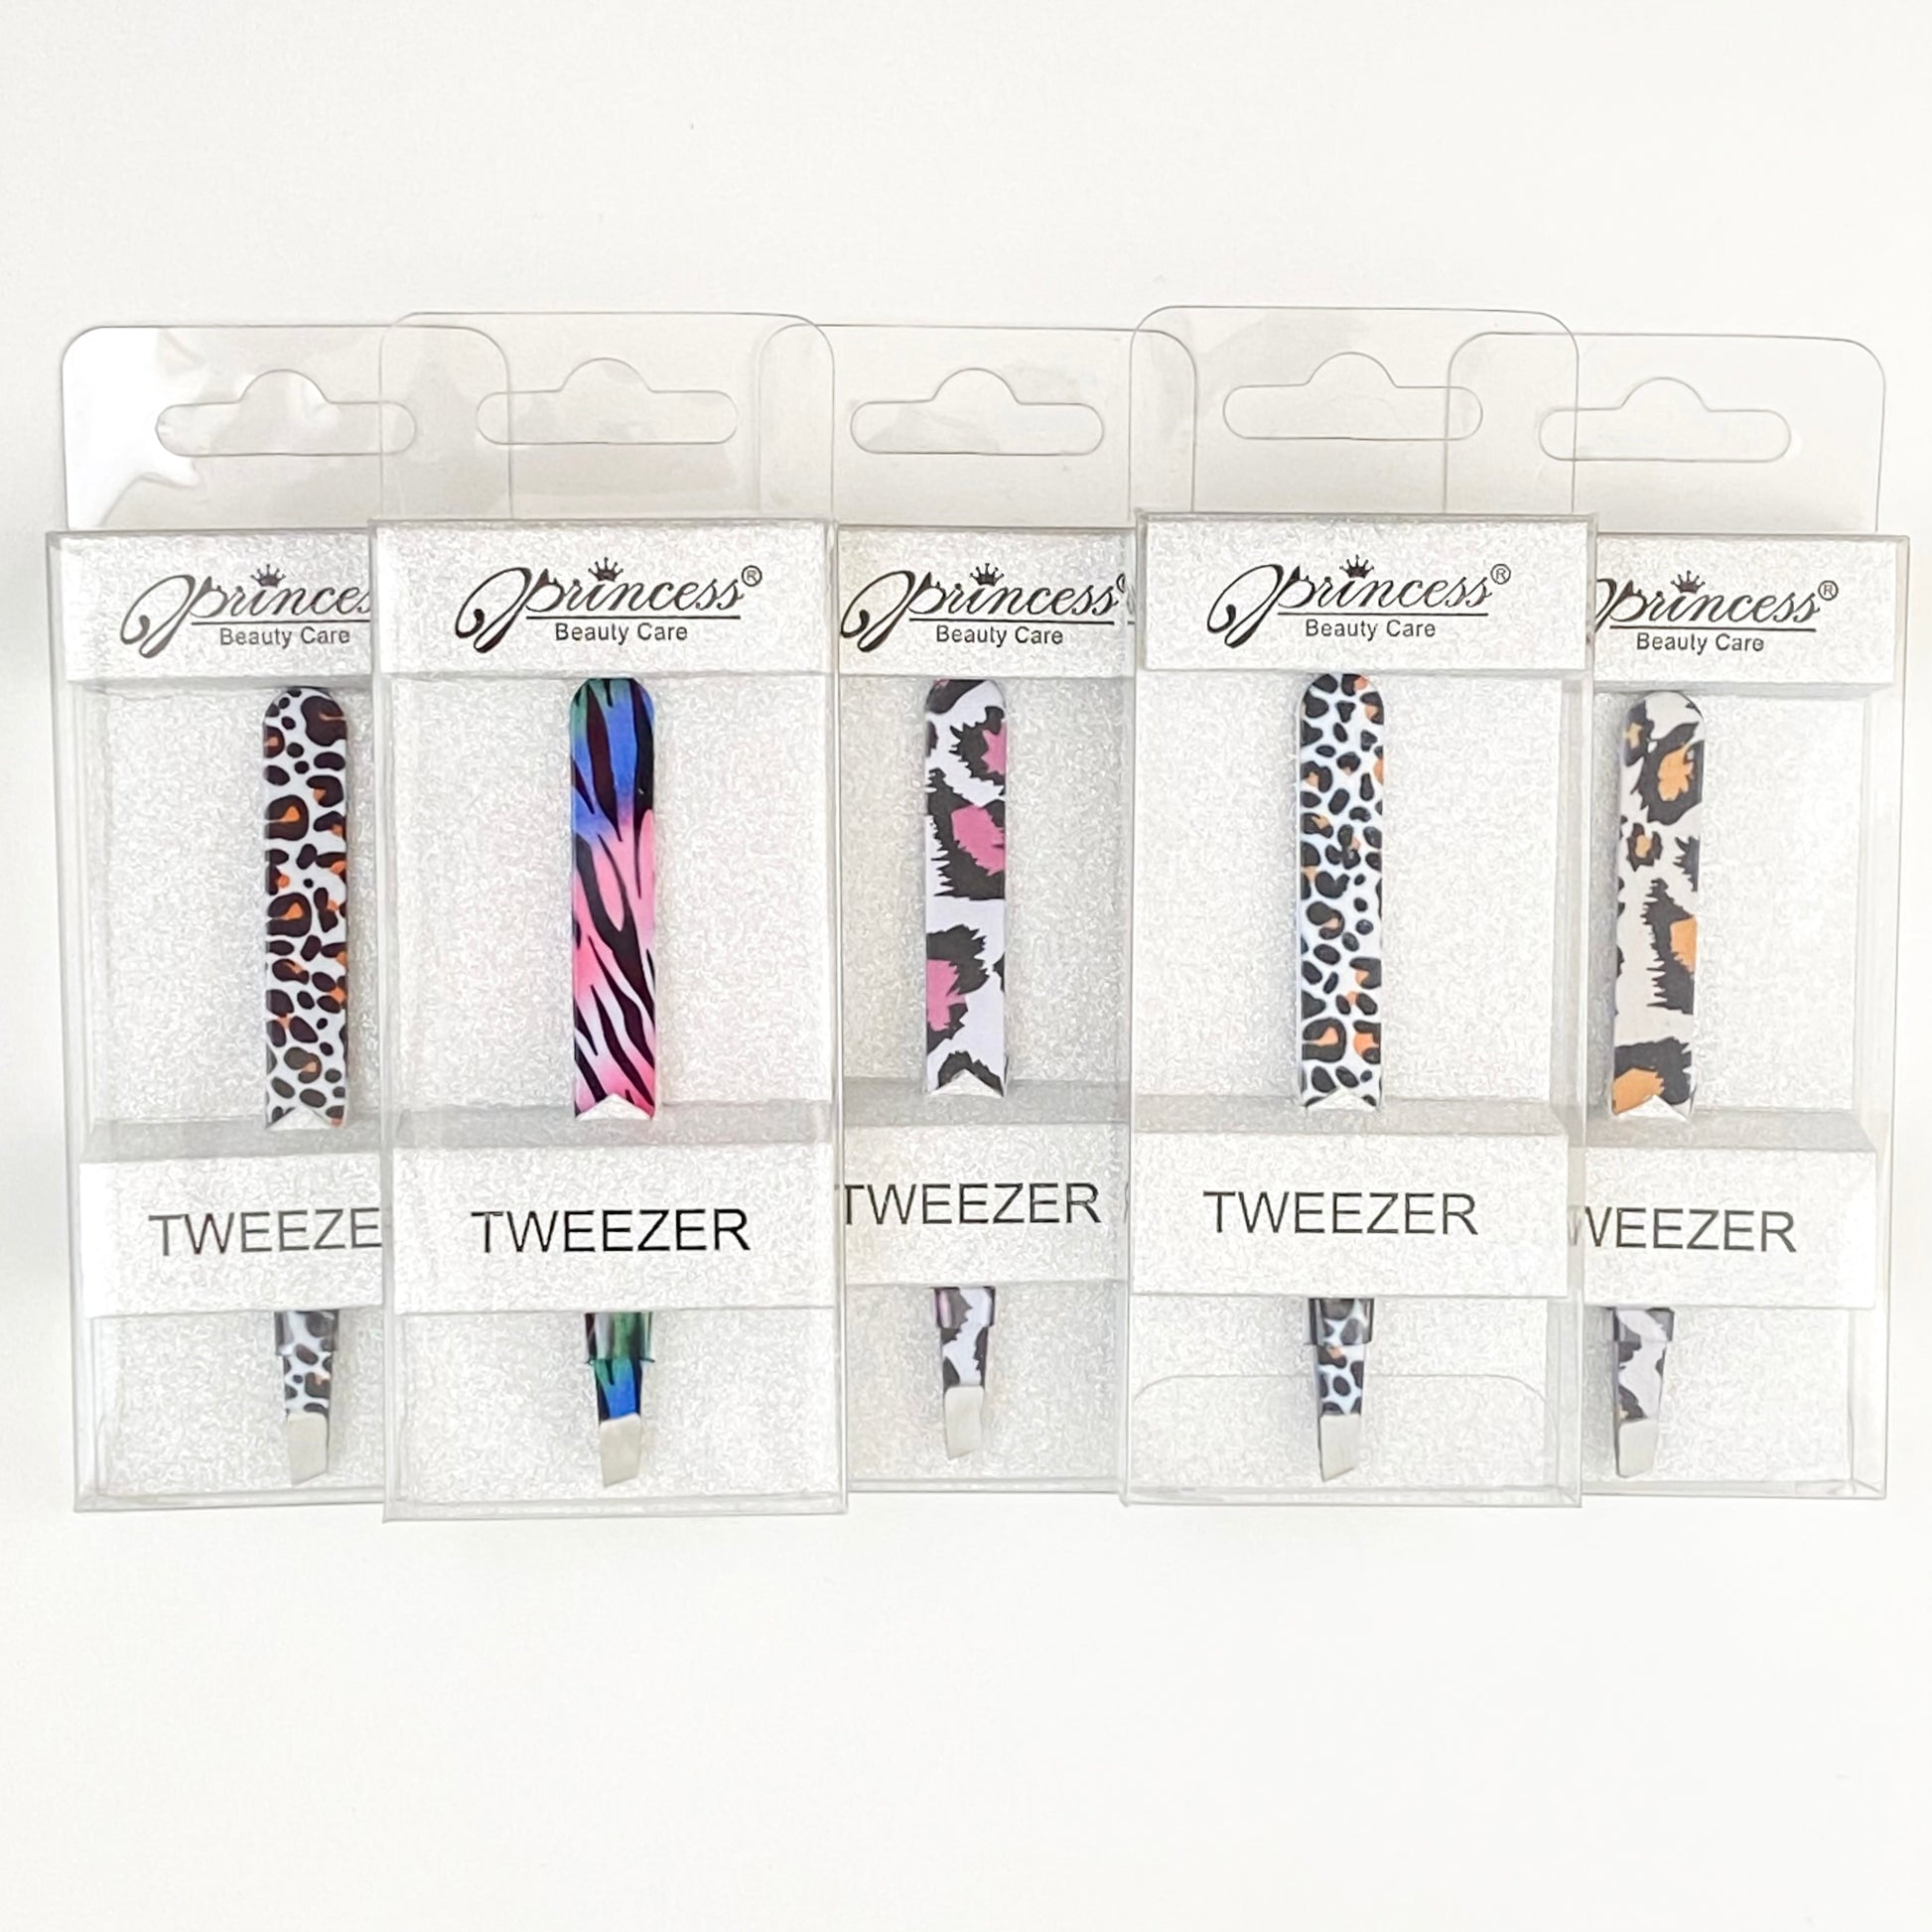 different styles of animal print tweezers in glitter packaging